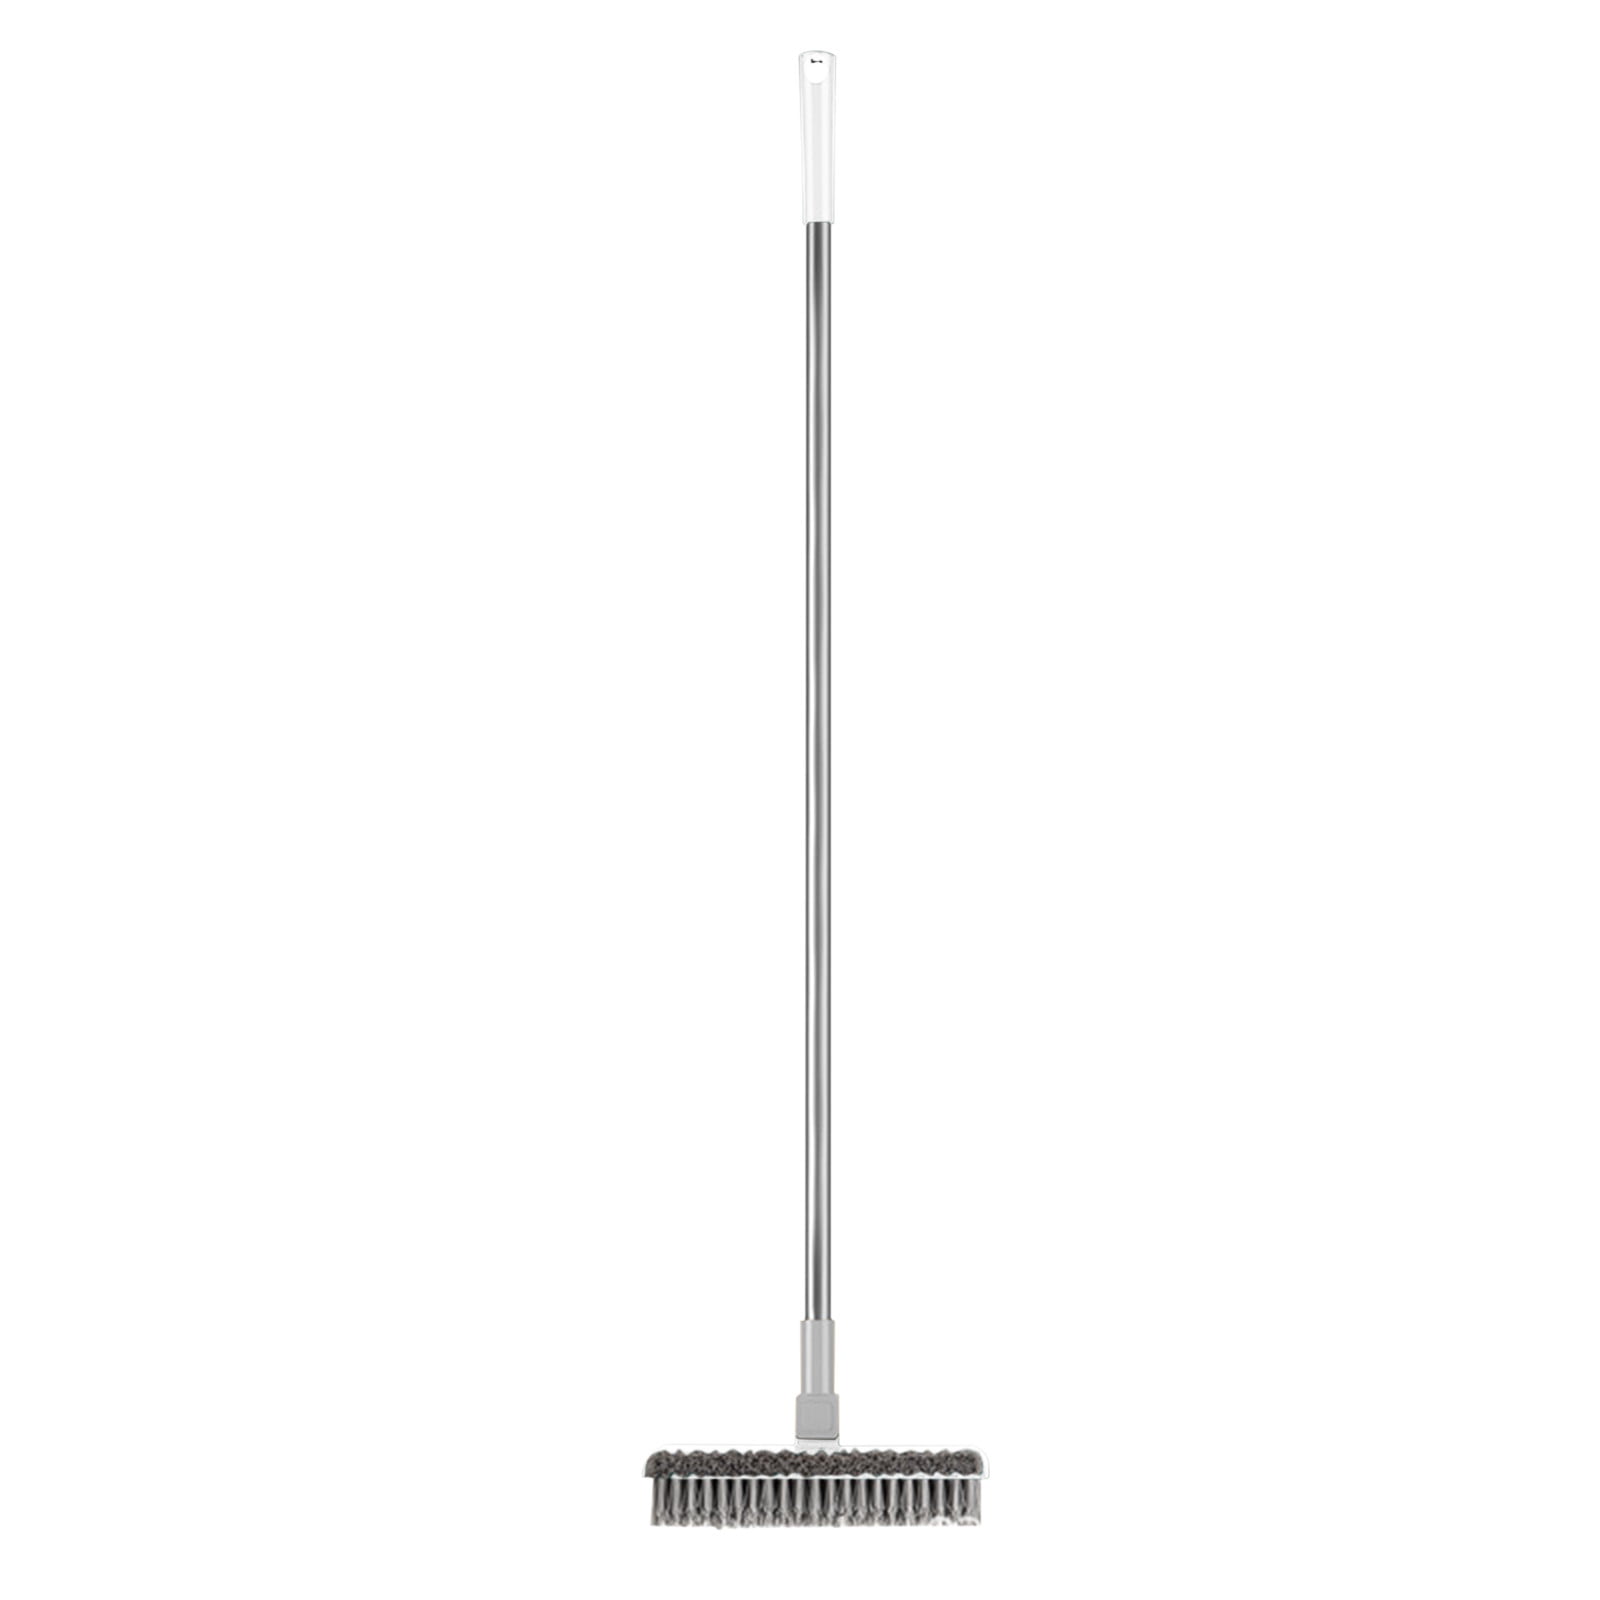 Prinxy 2 in 1 Scalable Cleaning Floor Scrub Brush Floor Brush with Long Handle Grout Brush Scrape V-Shape Stiff Bristle Cleaning Brush with Squeegee